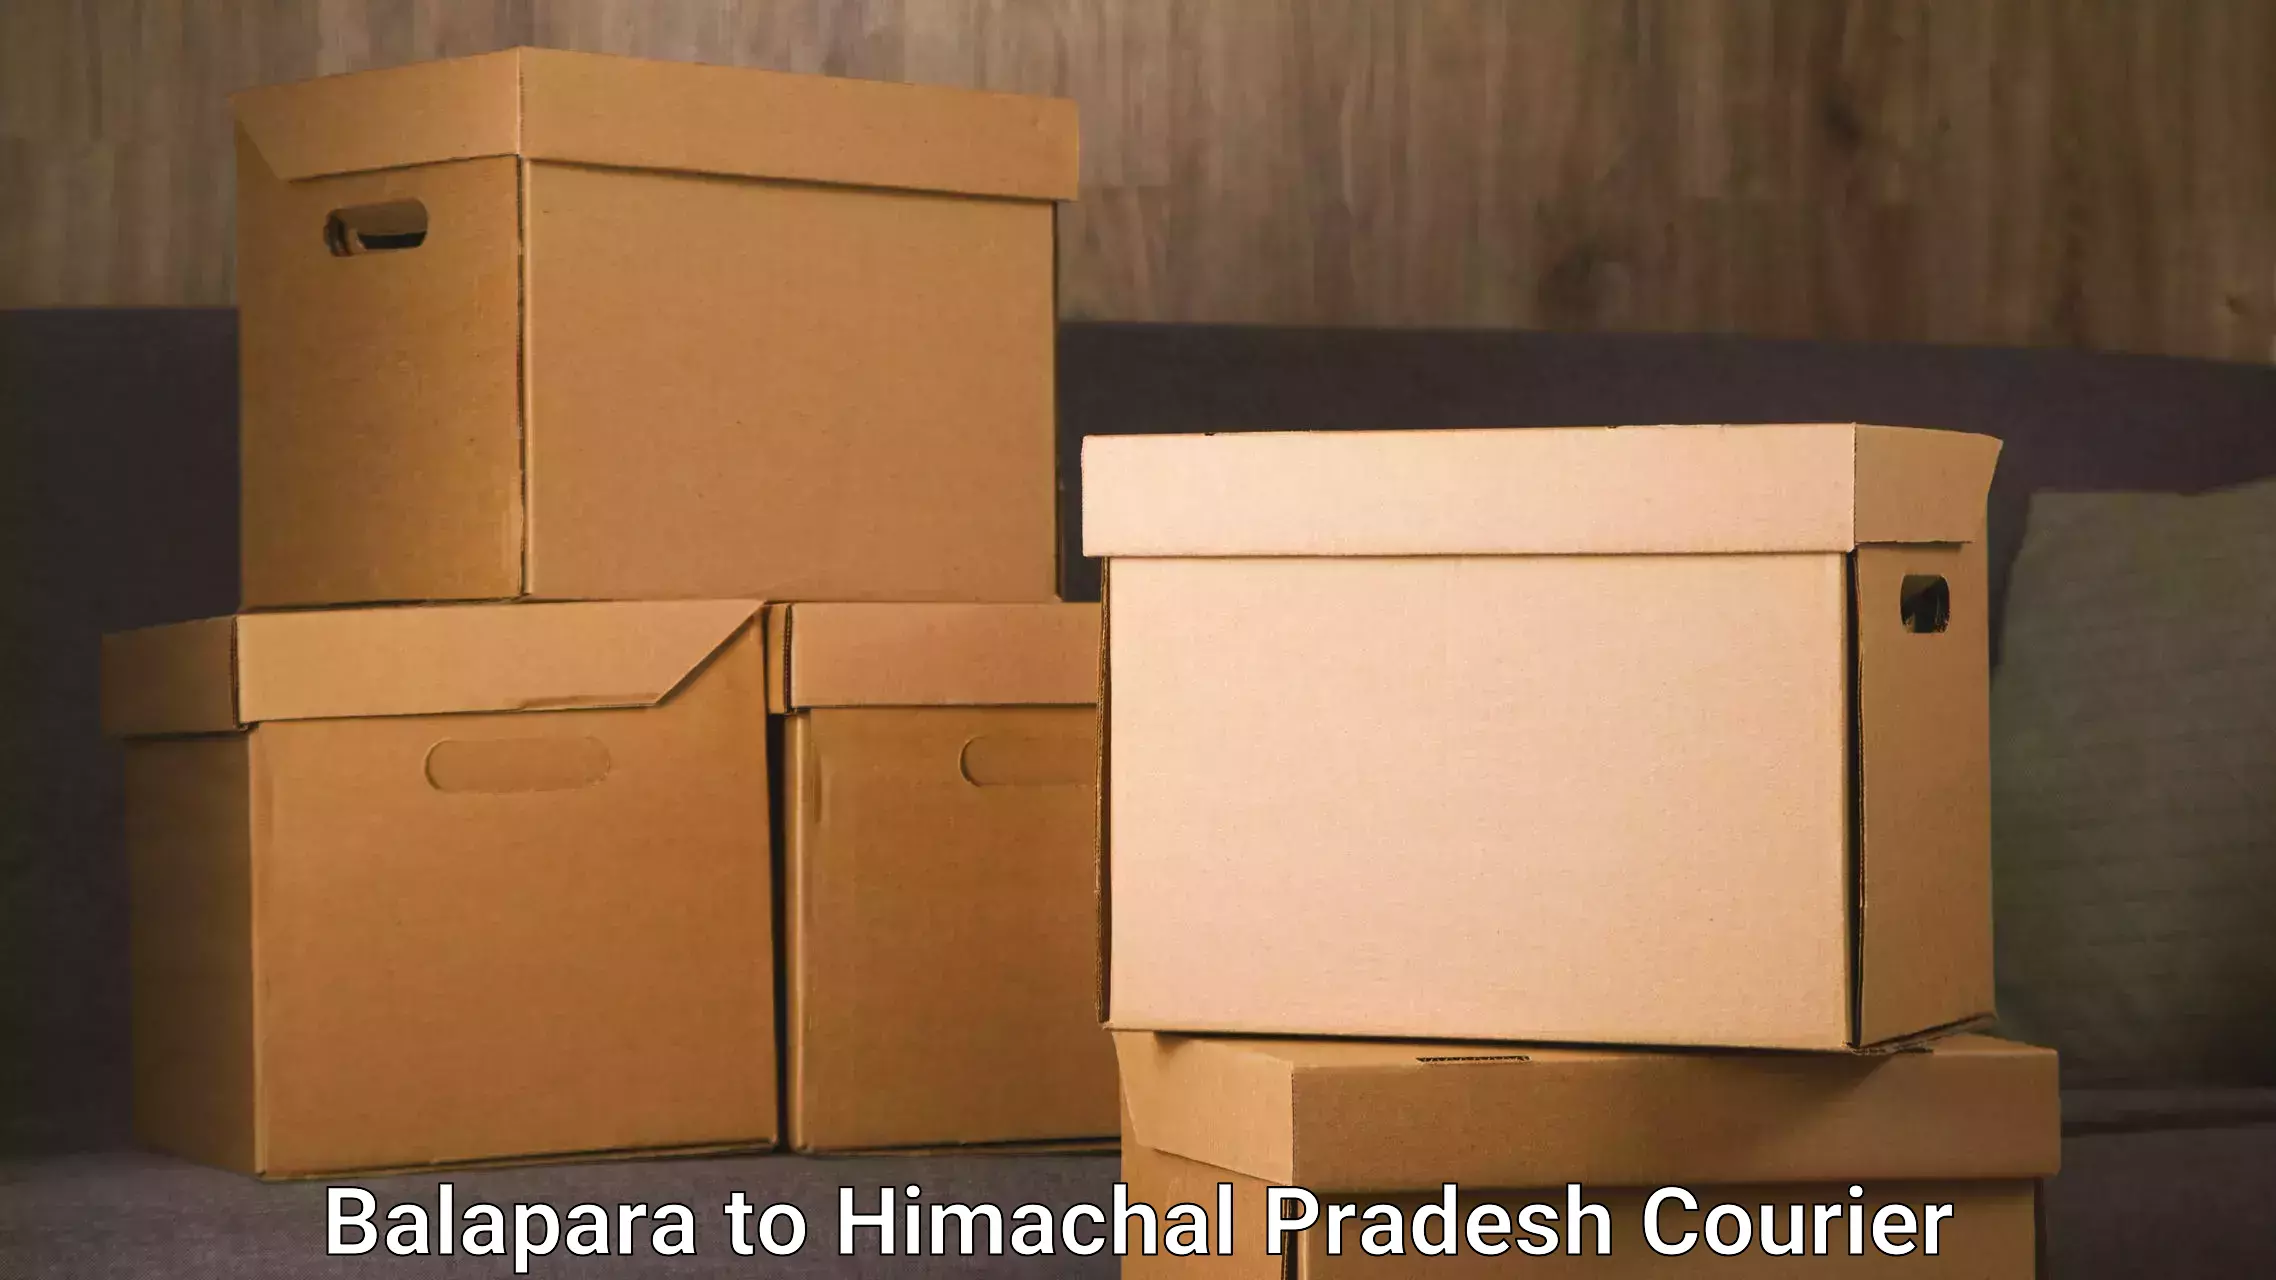 State-of-the-art courier technology Balapara to Dheera